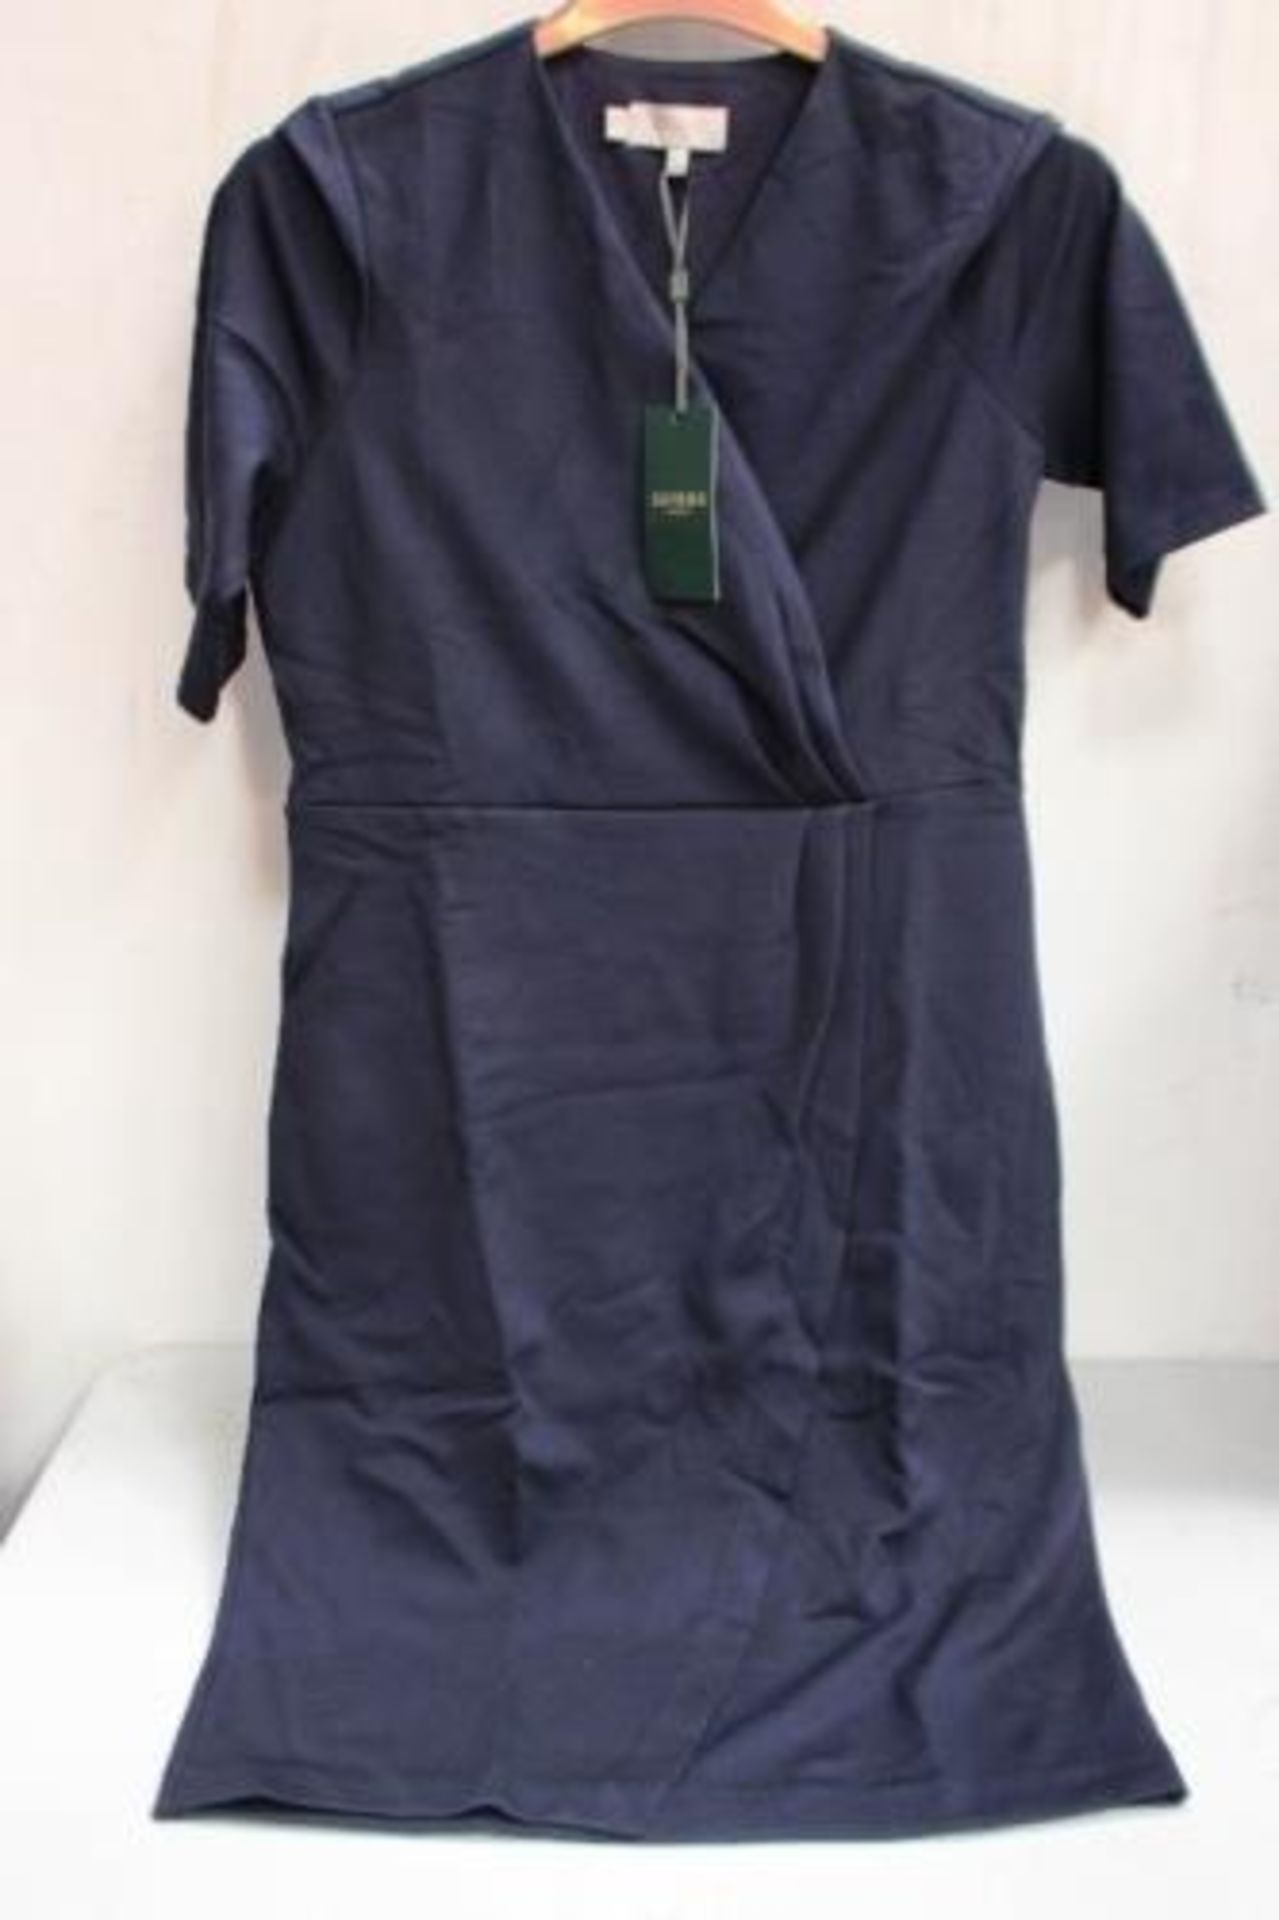 1 x Hobbs navy Ponte Olive dress, UK size 14 - New with tags (EB4)